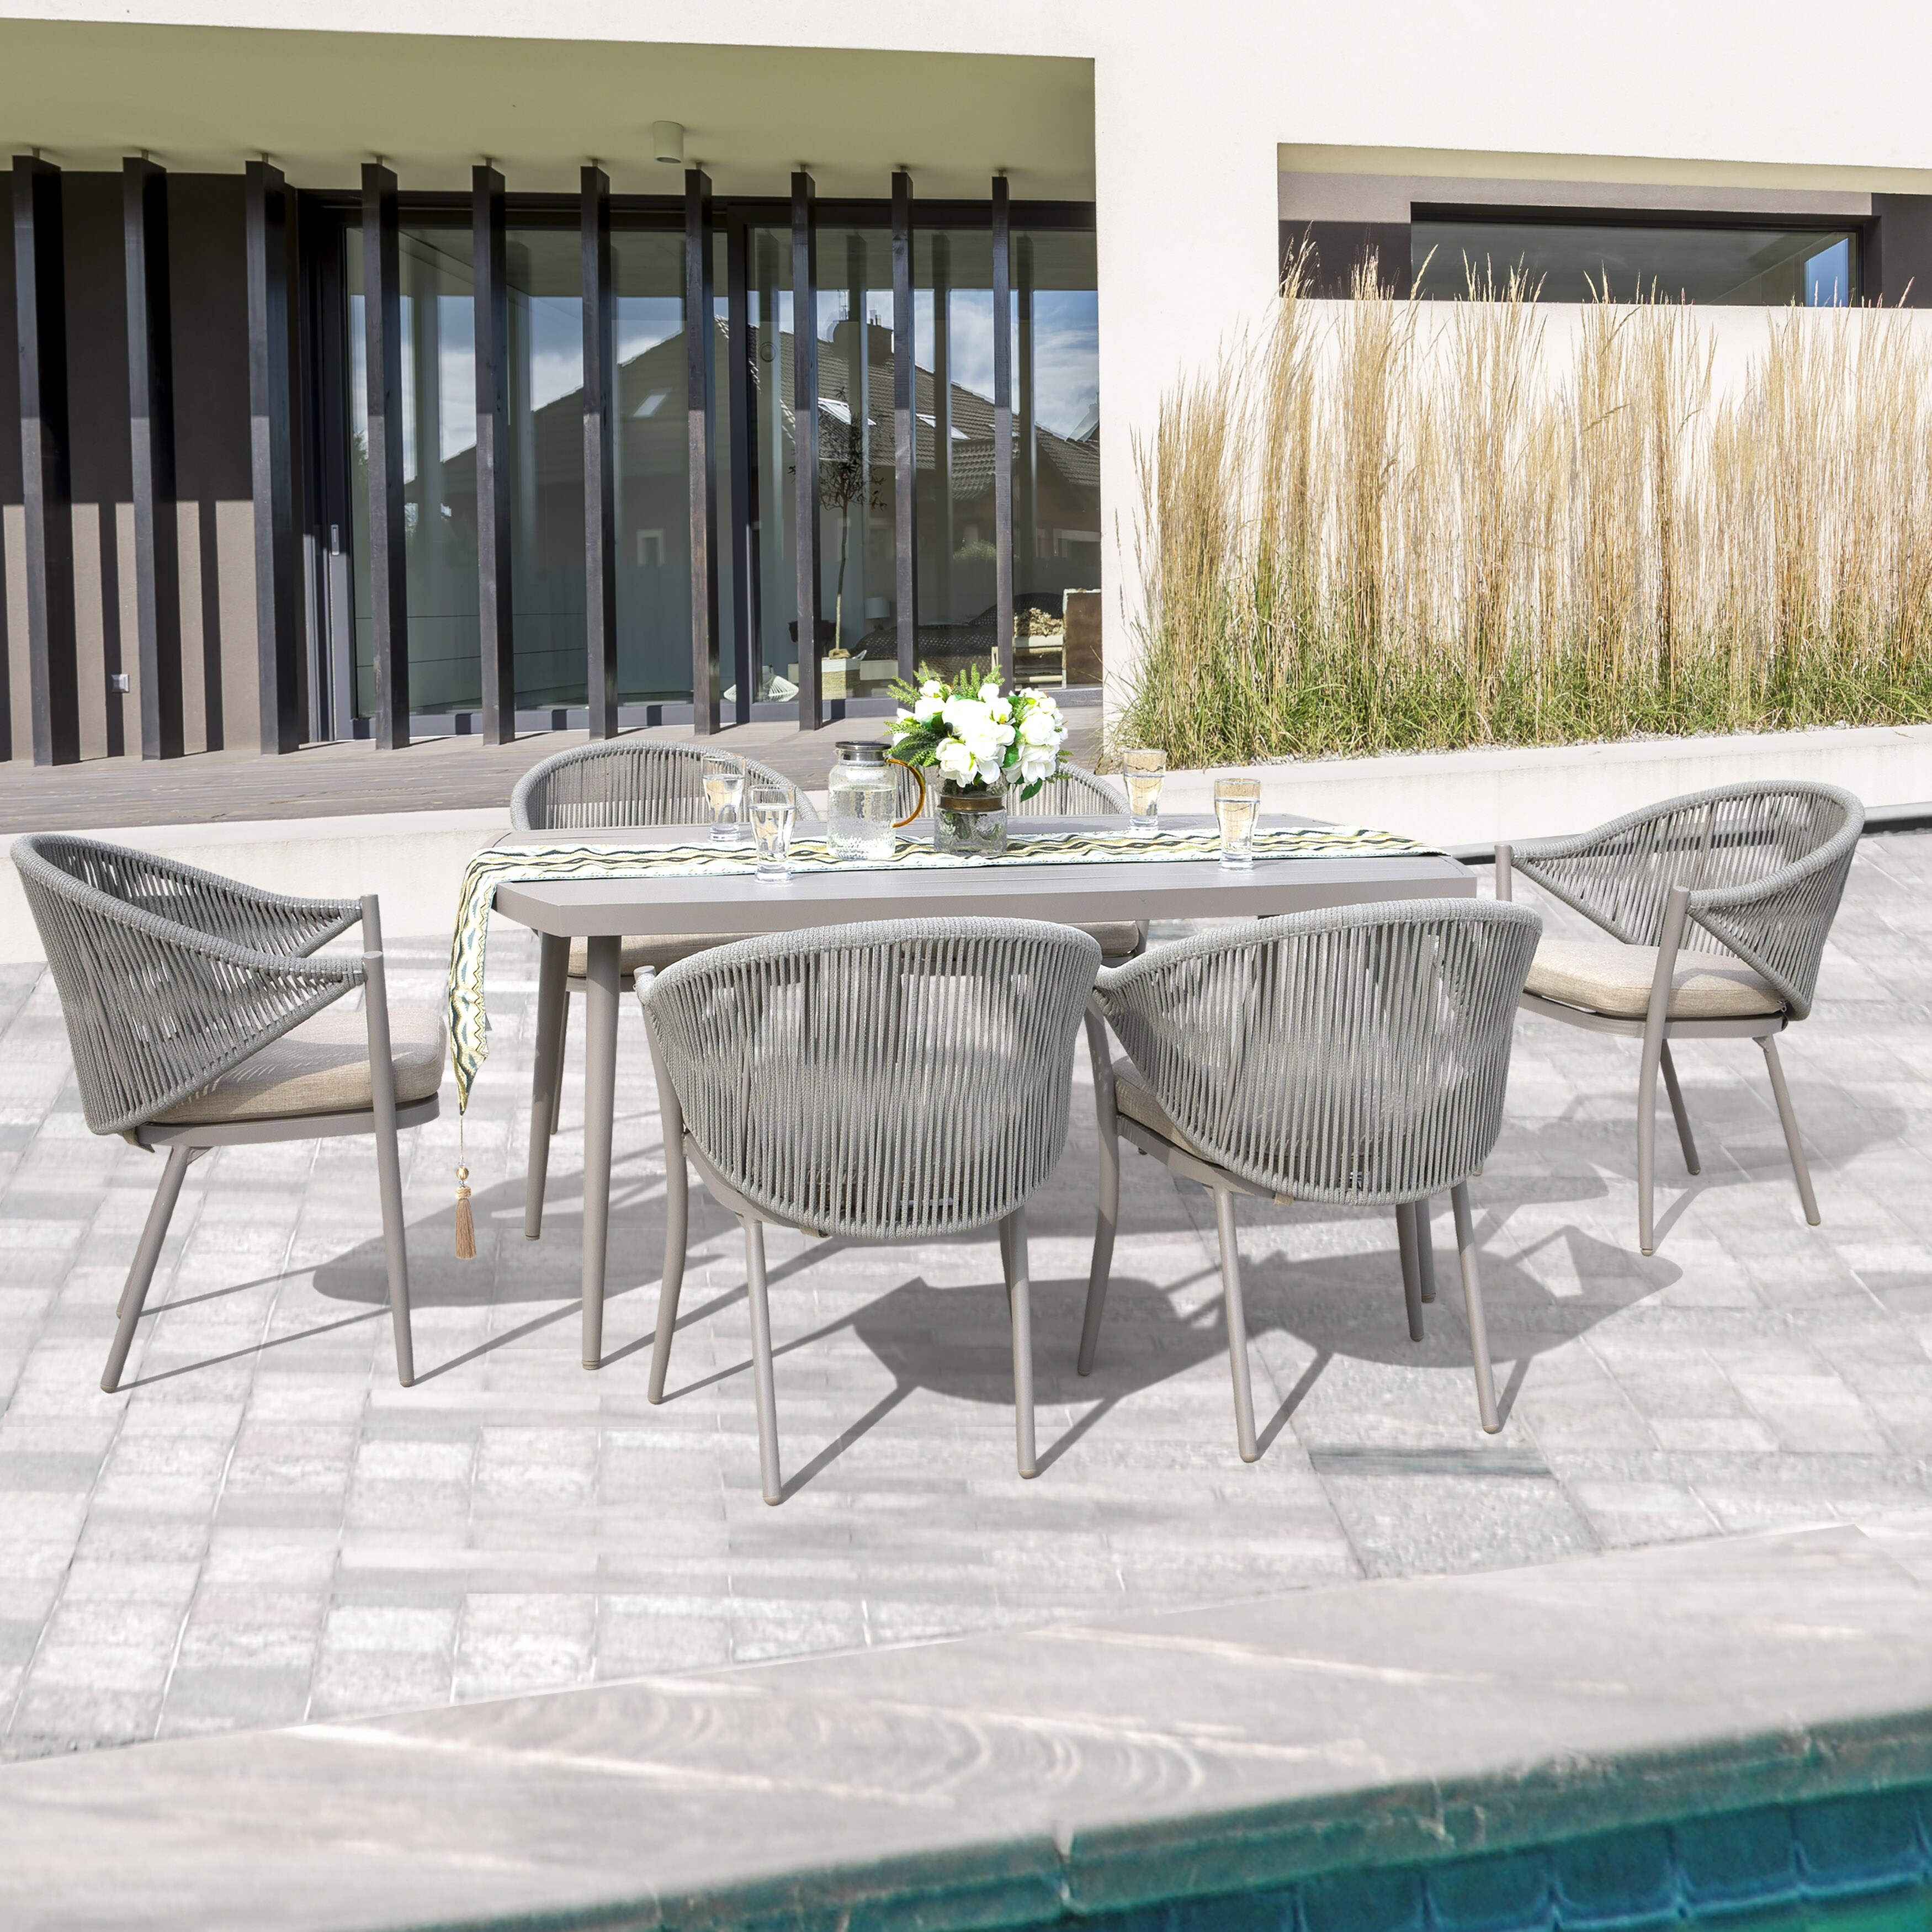 Nuu Garden Removable Aluminum and Woven Rope Outdoor Arm Dining